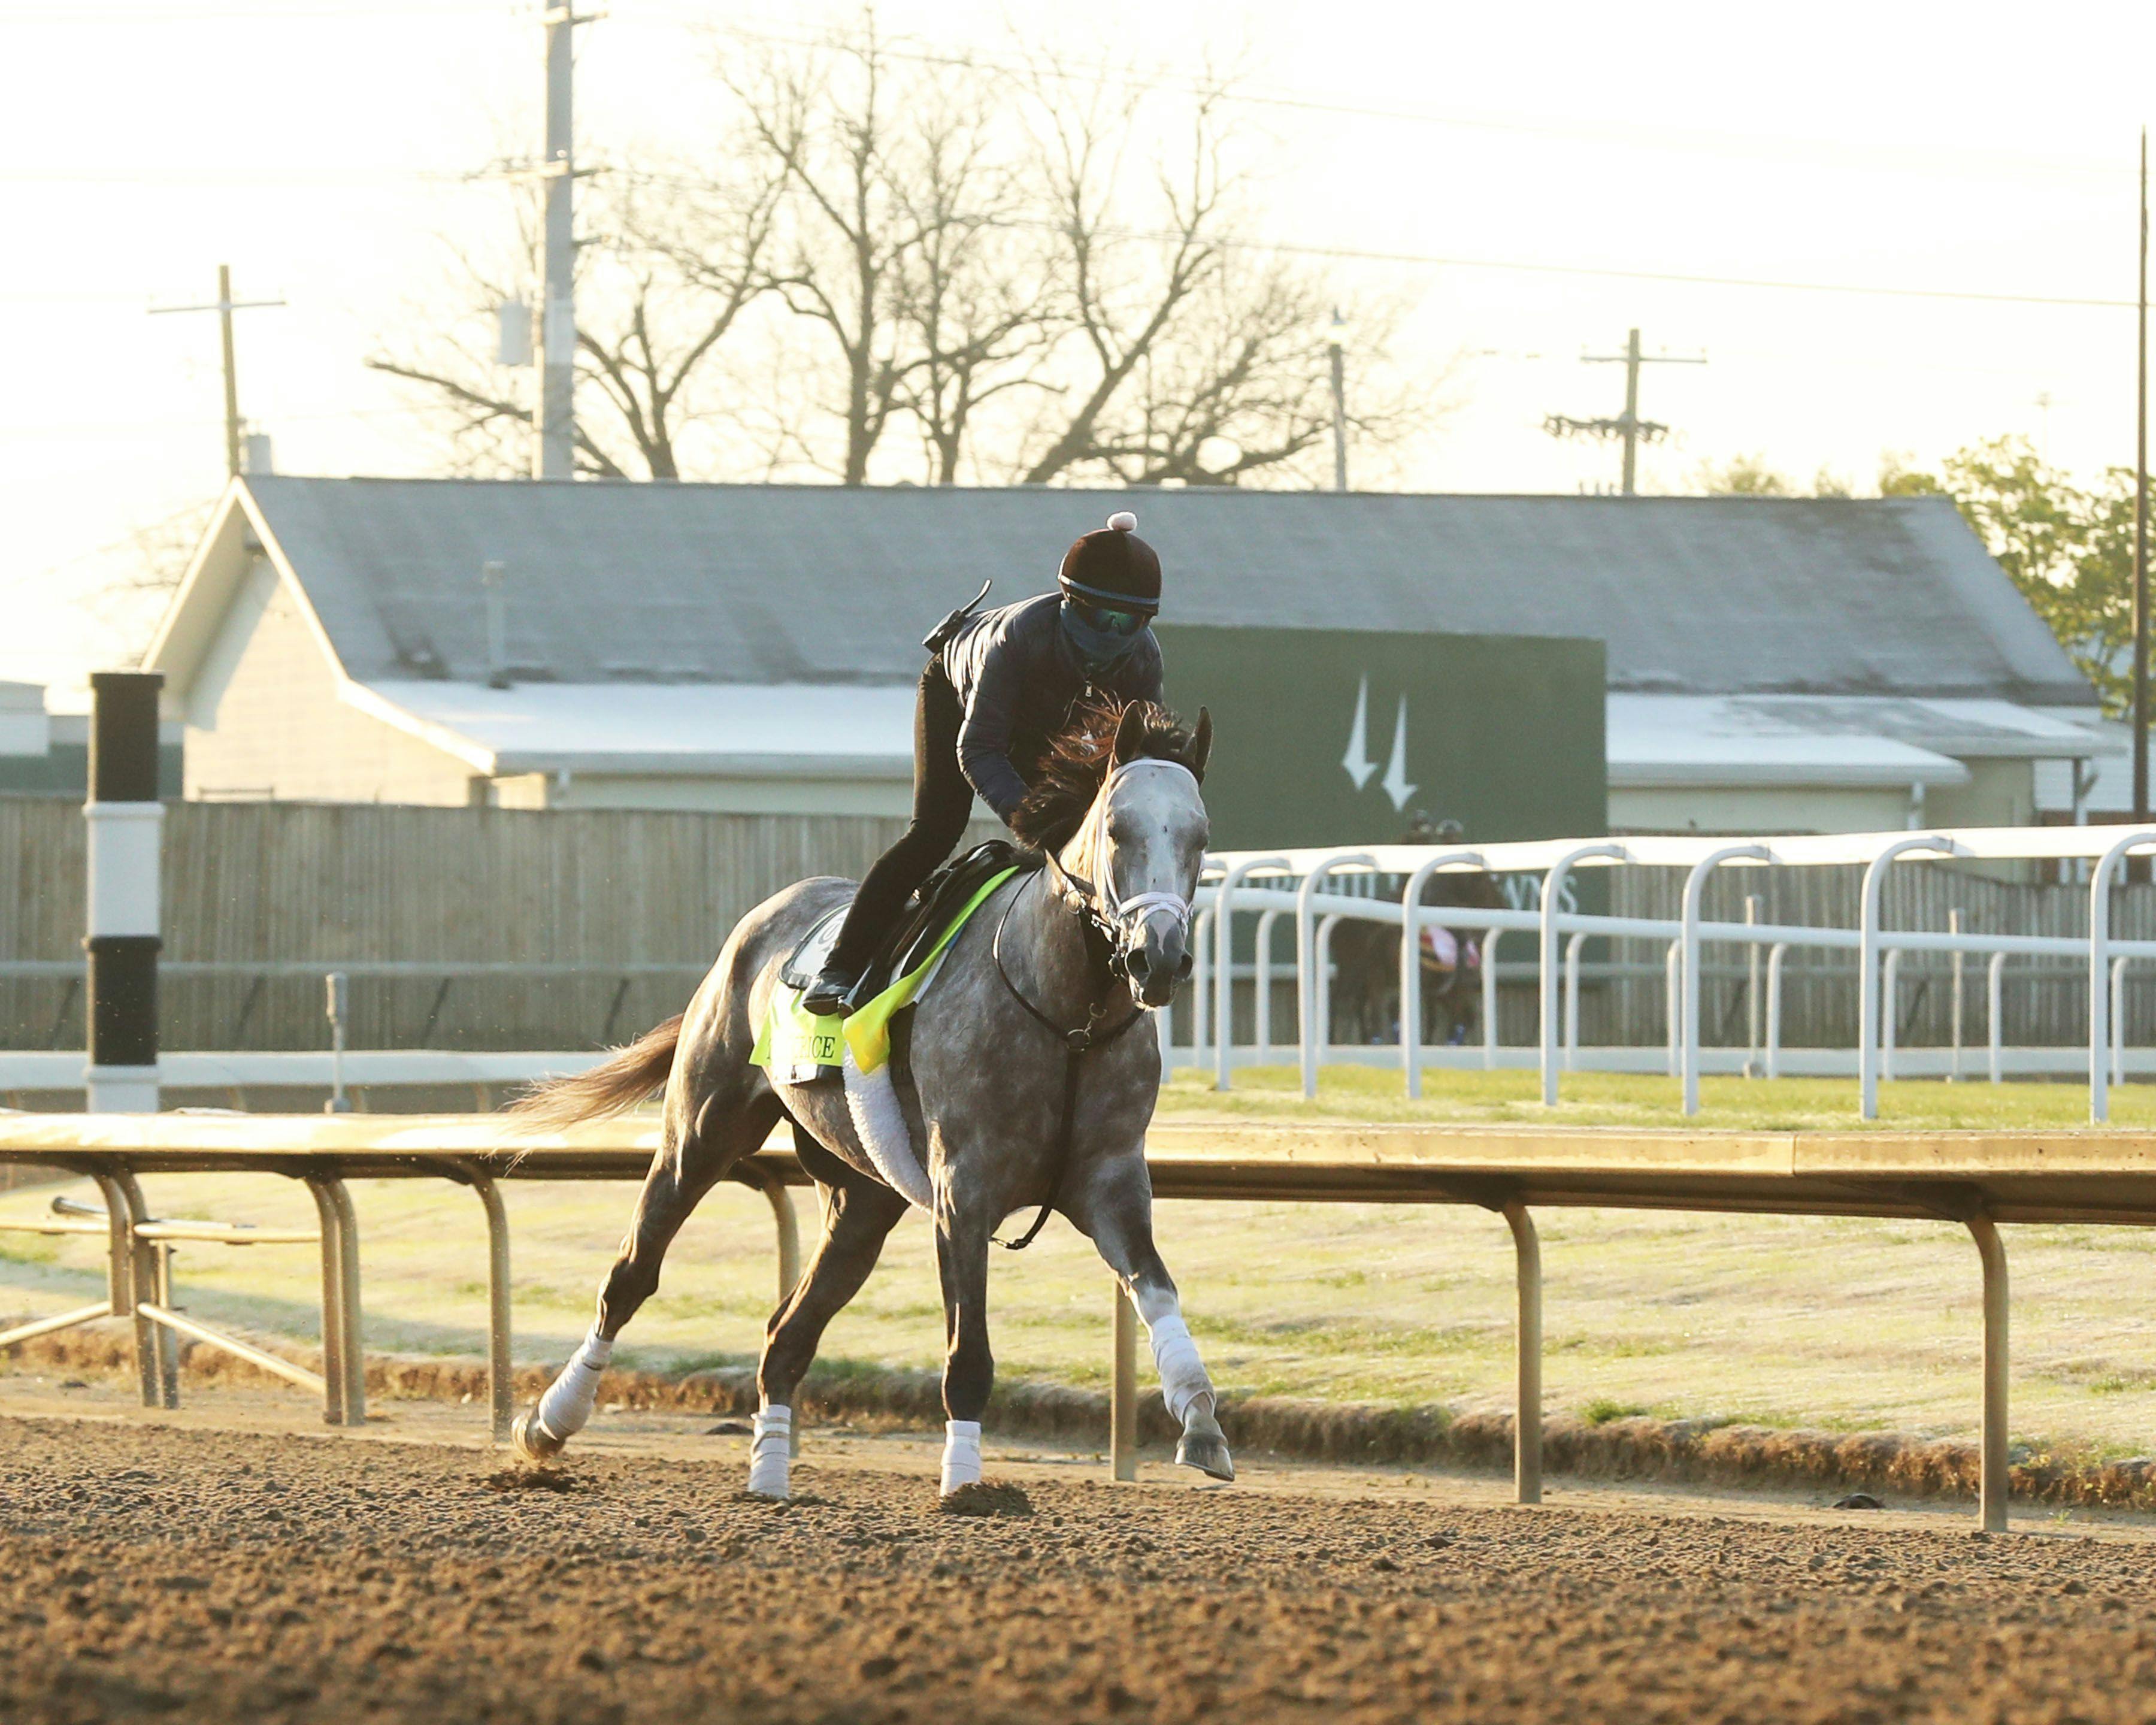 Tapit Trice Kentucky Derby Context TwinSpires